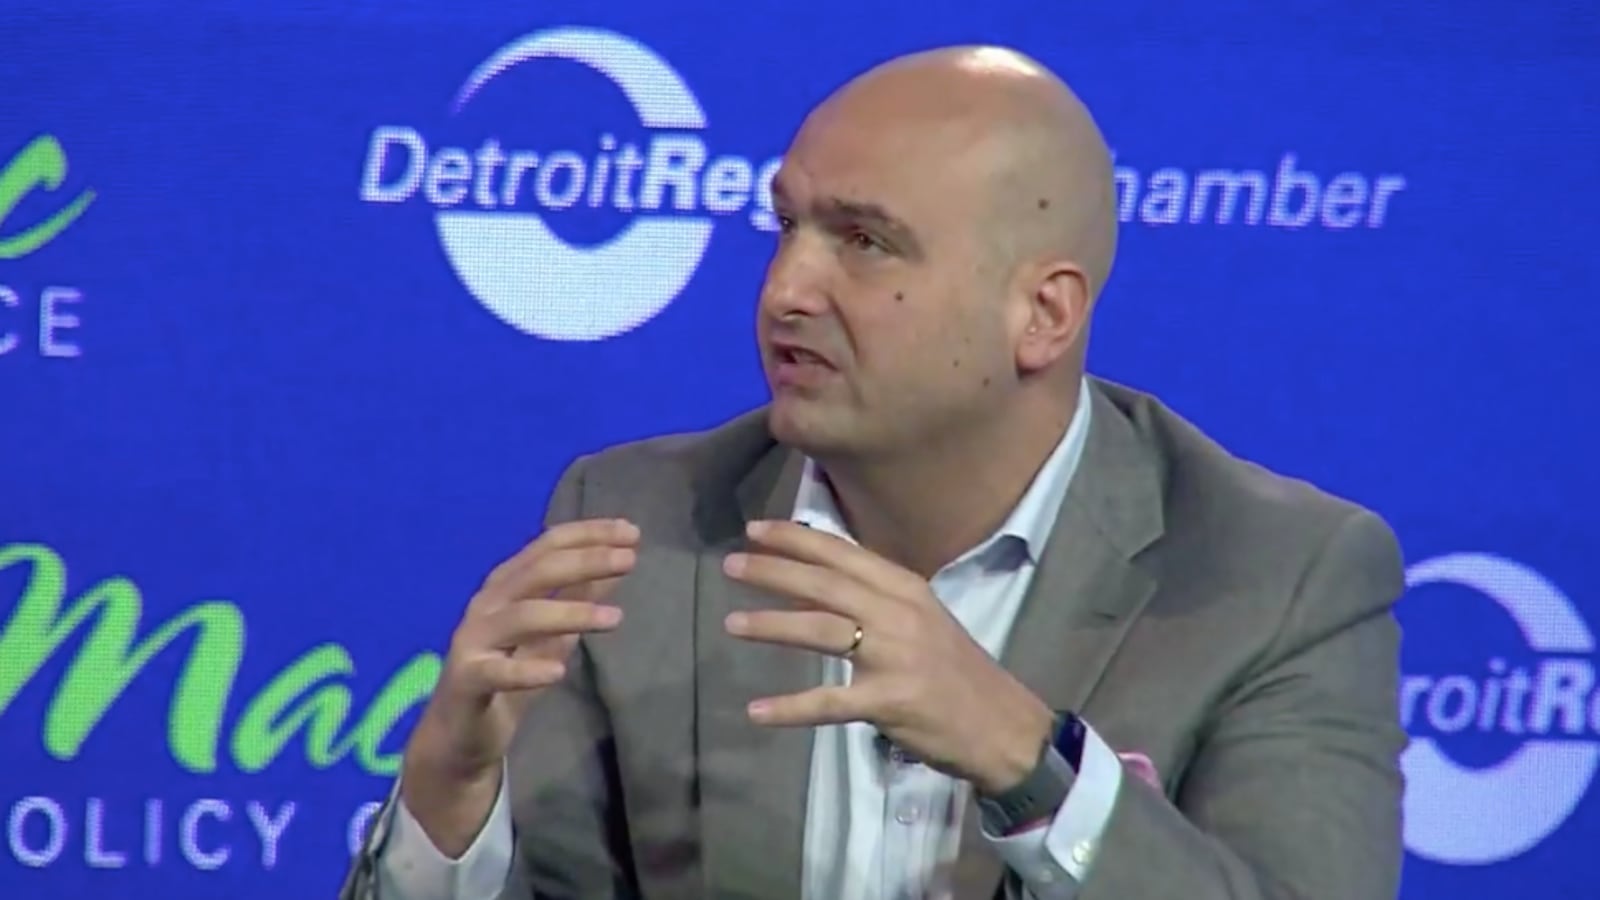 Detroit schools superintendent Nikolai Vitti speaking at the Mackinac Policy Conference on May 31, 2018.